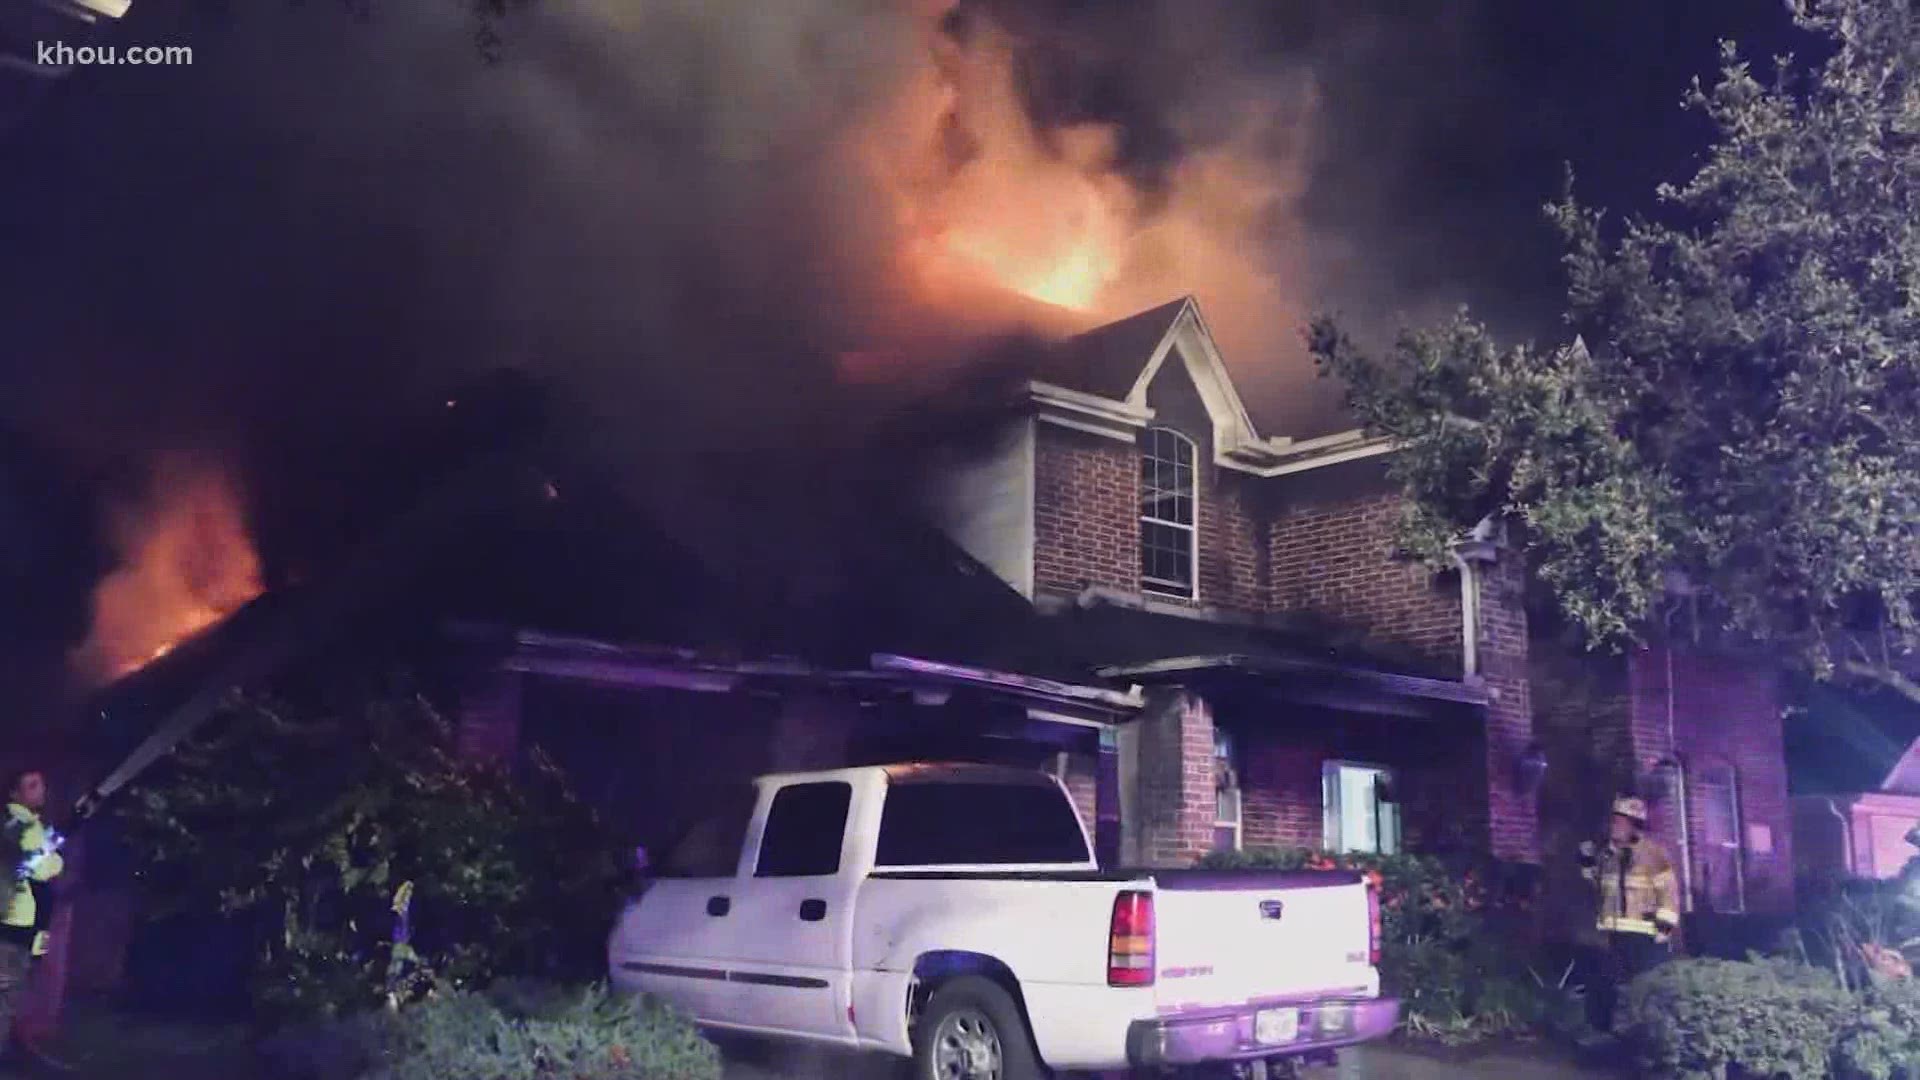 A mother and several children lost their home near Jersey Village in an early-morning fire, firefighters said.